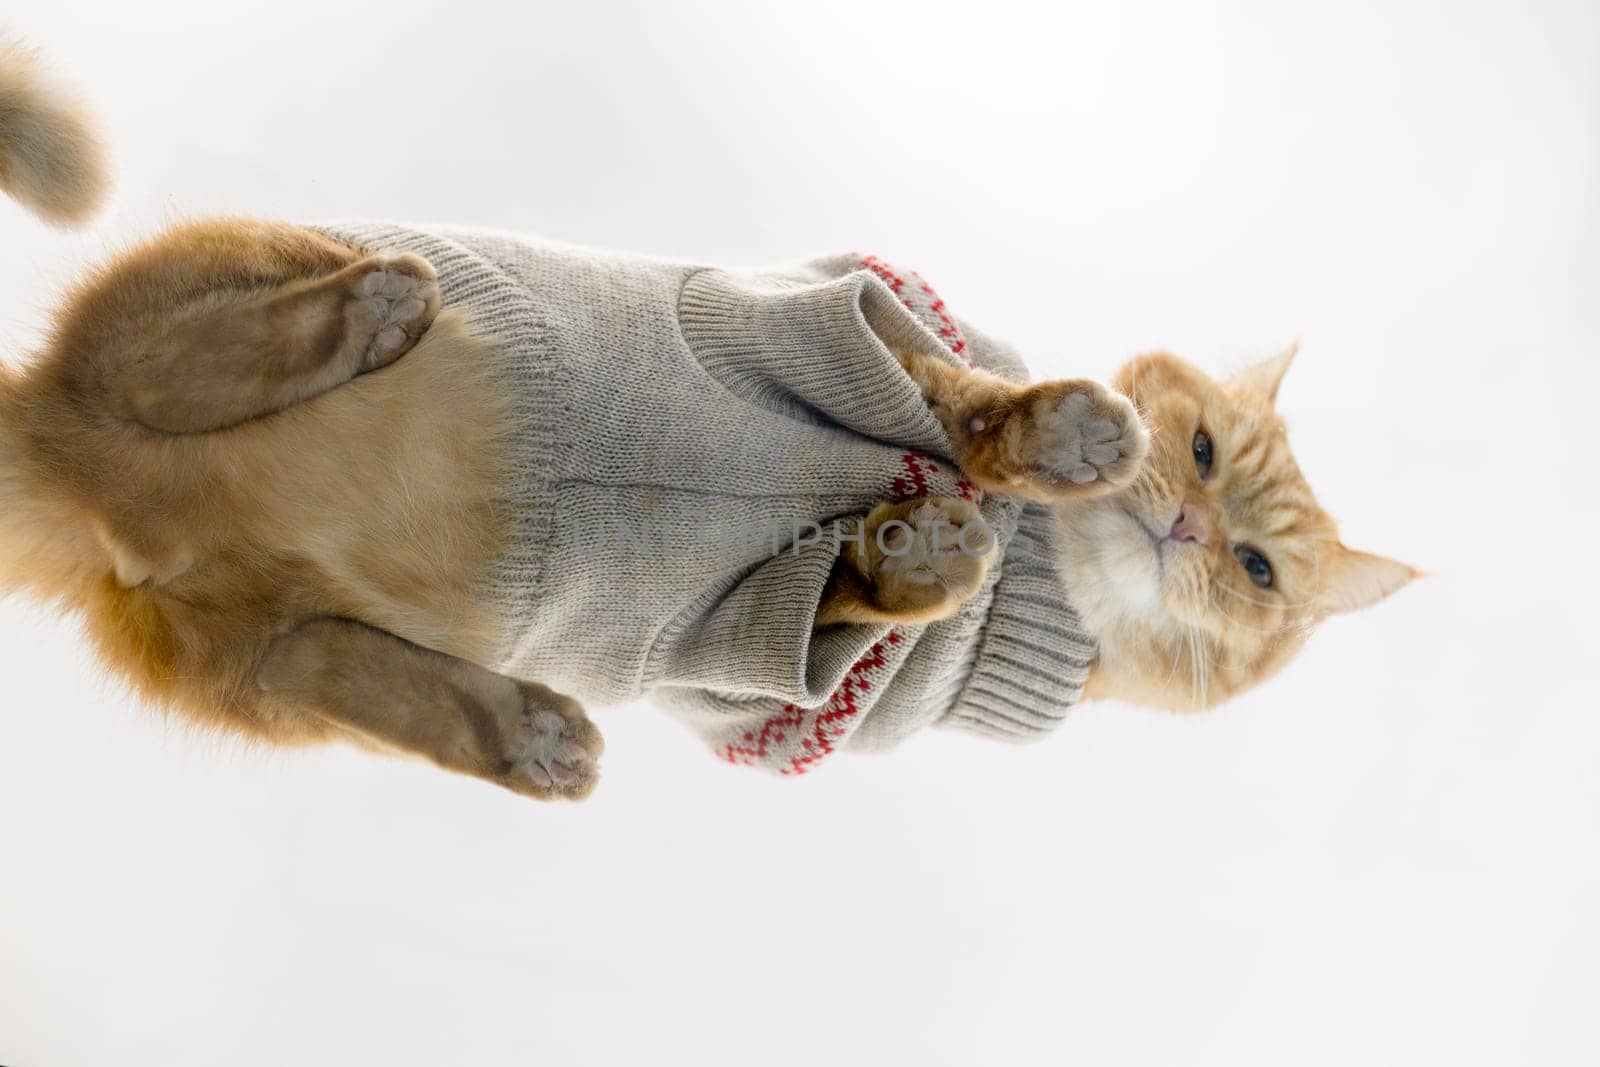 Portrait of one ginger purebred beautiful cat wearing a Christmas knitted sweater, standing with his paws on a glass table and looking down at the camera, close-up view from below.